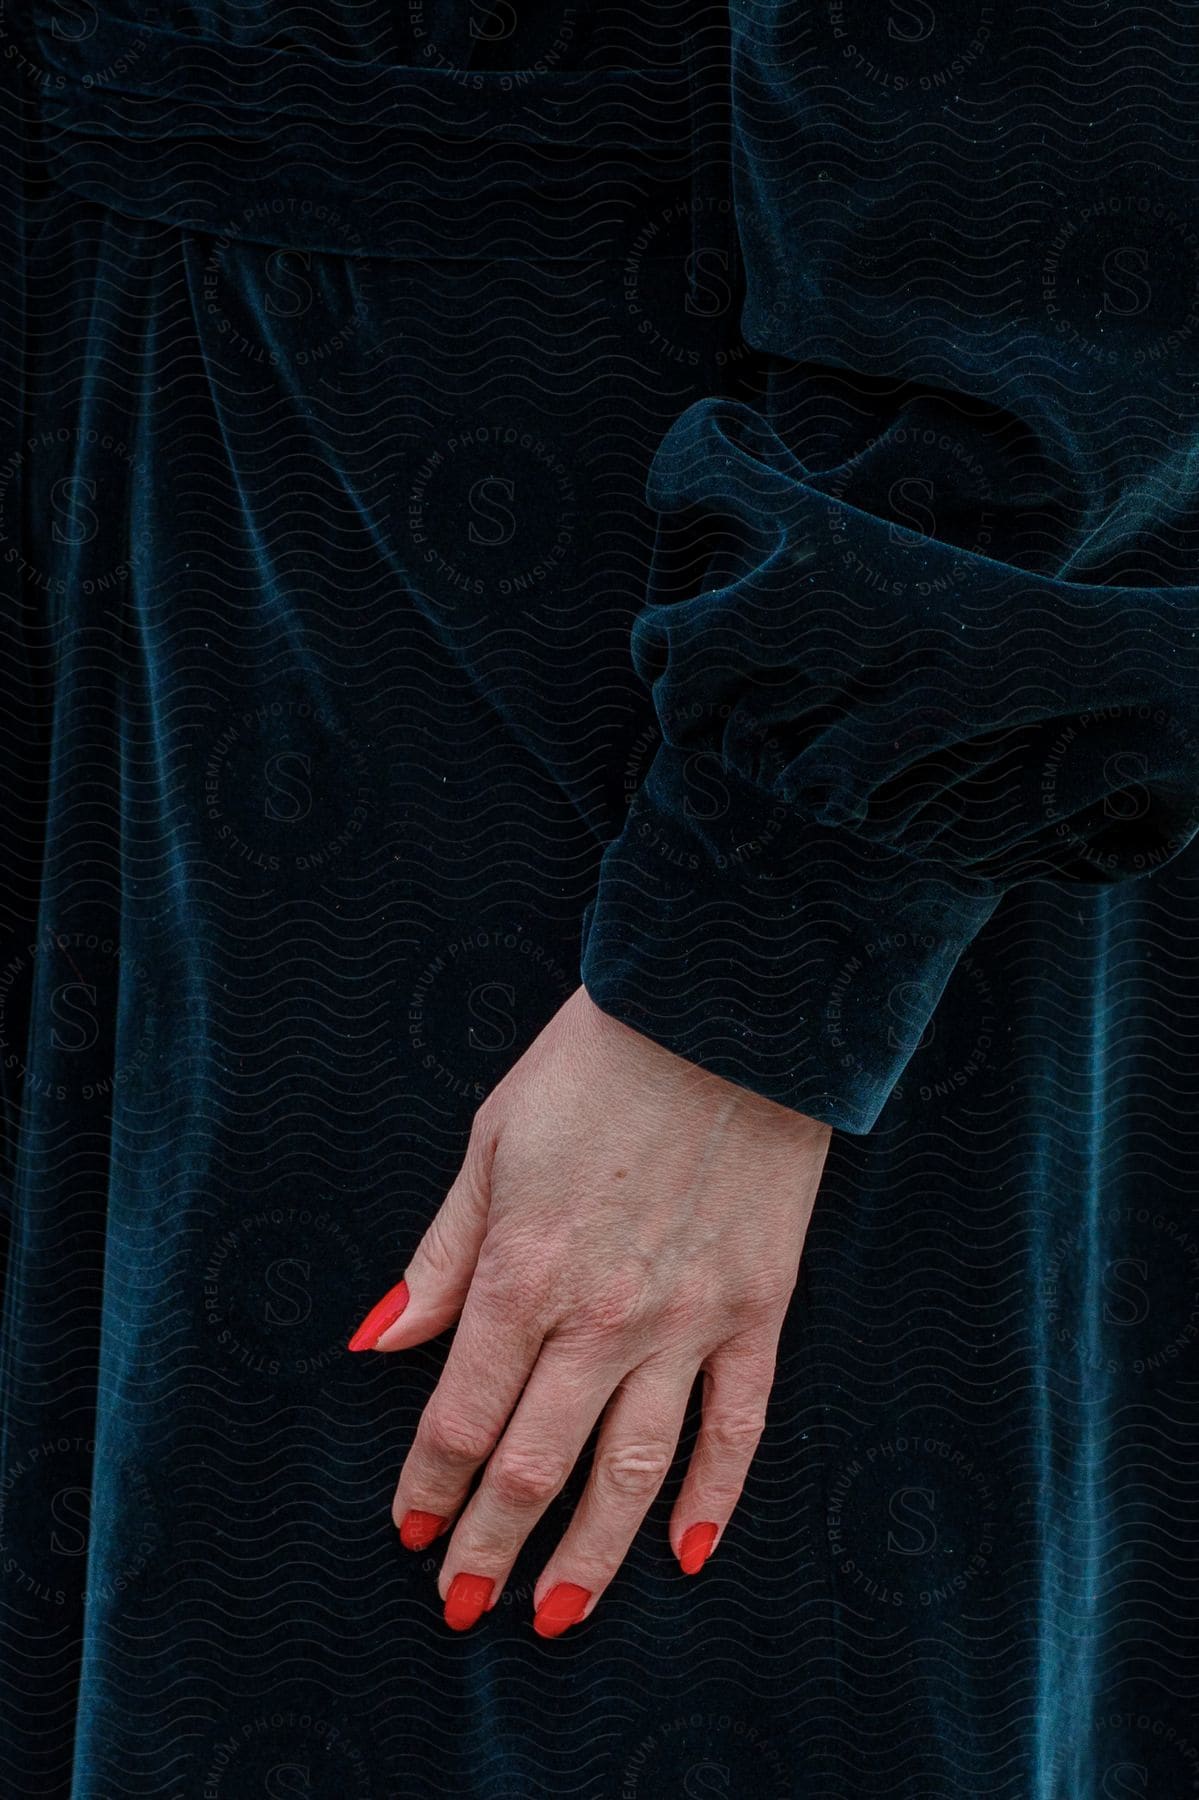 Photograph of a hand with red painted nails